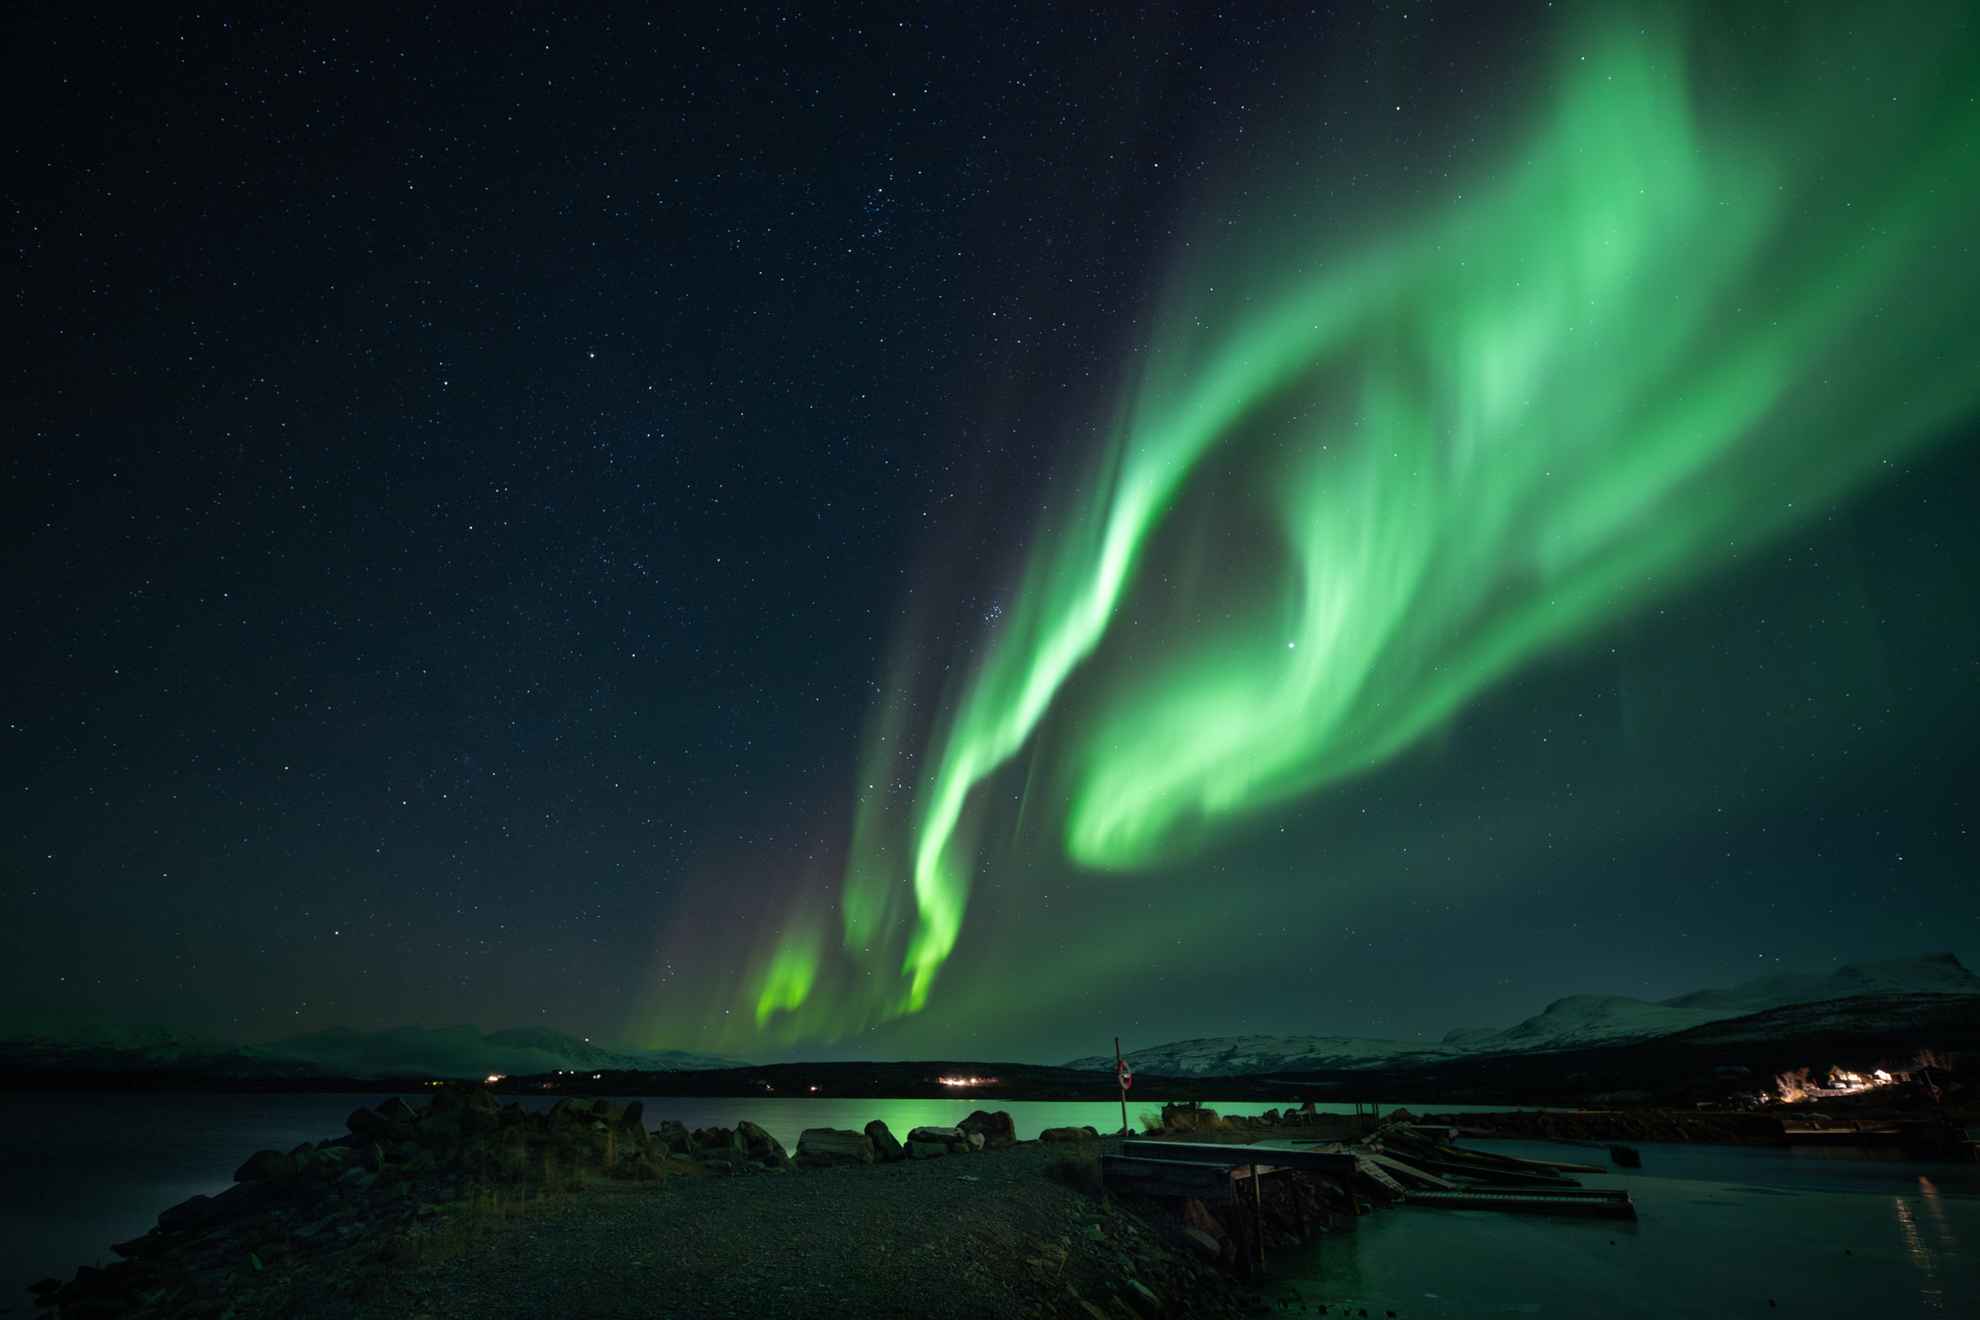 Northern Lights in a bright green on a dark night sky